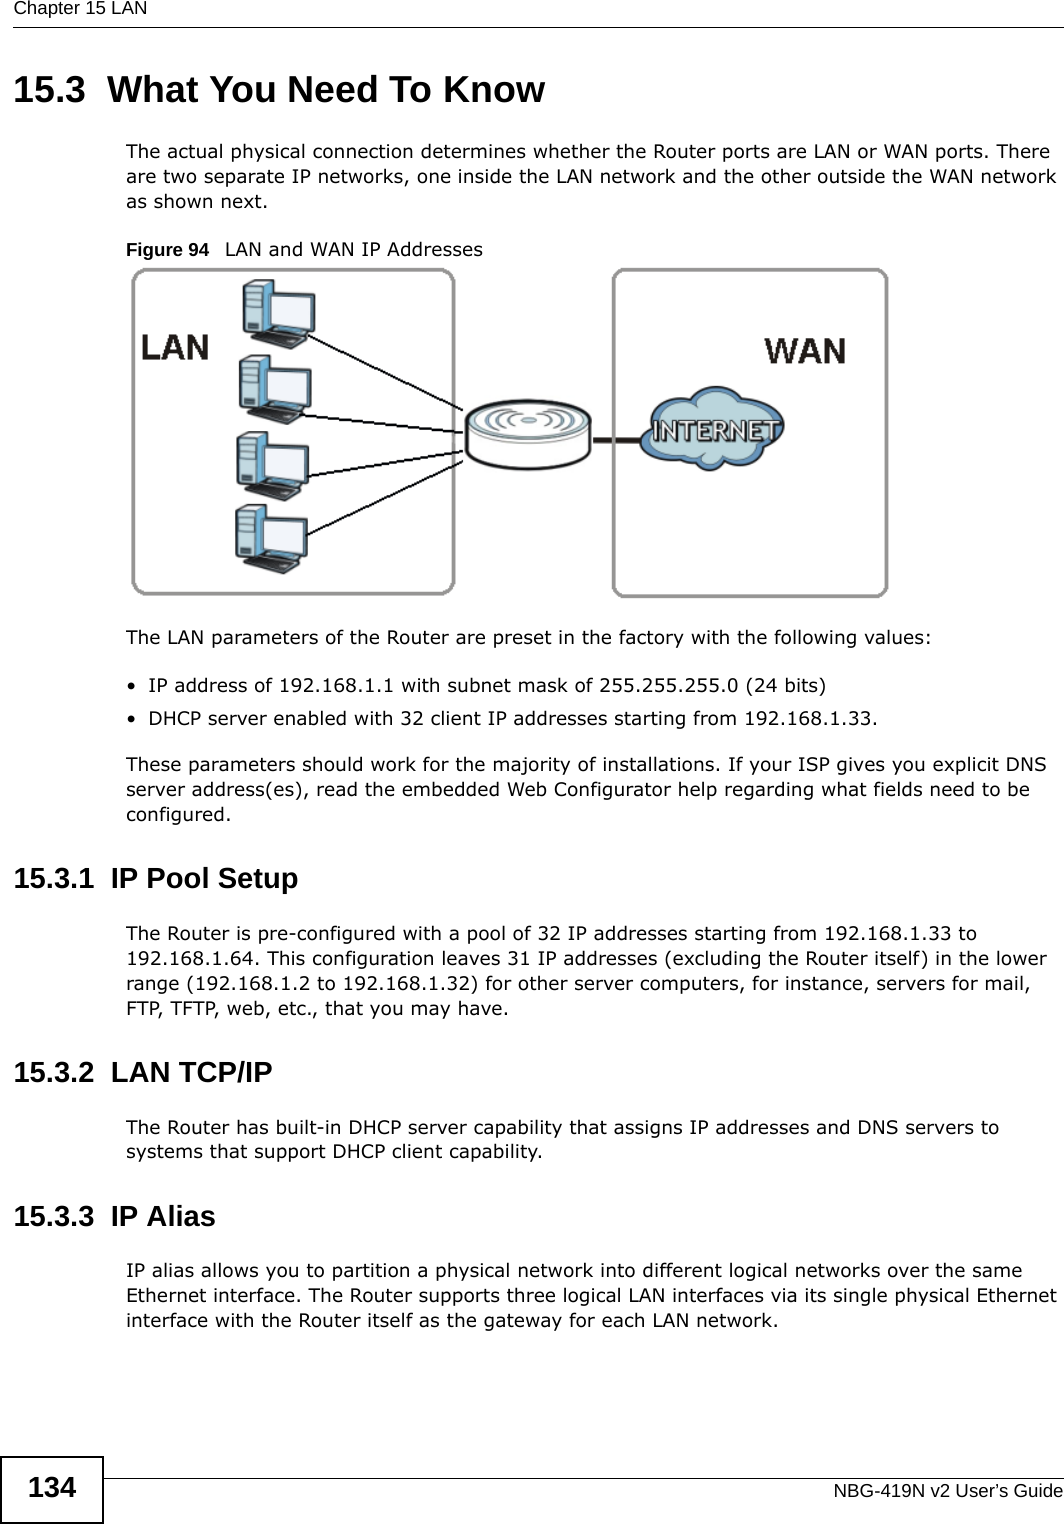 Chapter 15 LANNBG-419N v2 User’s Guide13415.3  What You Need To KnowThe actual physical connection determines whether the Router ports are LAN or WAN ports. There are two separate IP networks, one inside the LAN network and the other outside the WAN network as shown next.Figure 94   LAN and WAN IP AddressesThe LAN parameters of the Router are preset in the factory with the following values:• IP address of 192.168.1.1 with subnet mask of 255.255.255.0 (24 bits)• DHCP server enabled with 32 client IP addresses starting from 192.168.1.33. These parameters should work for the majority of installations. If your ISP gives you explicit DNS server address(es), read the embedded Web Configurator help regarding what fields need to be configured.15.3.1  IP Pool SetupThe Router is pre-configured with a pool of 32 IP addresses starting from 192.168.1.33 to 192.168.1.64. This configuration leaves 31 IP addresses (excluding the Router itself) in the lower range (192.168.1.2 to 192.168.1.32) for other server computers, for instance, servers for mail, FTP, TFTP, web, etc., that you may have.15.3.2  LAN TCP/IP The Router has built-in DHCP server capability that assigns IP addresses and DNS servers to systems that support DHCP client capability.15.3.3  IP AliasIP alias allows you to partition a physical network into different logical networks over the same Ethernet interface. The Router supports three logical LAN interfaces via its single physical Ethernet interface with the Router itself as the gateway for each LAN network.